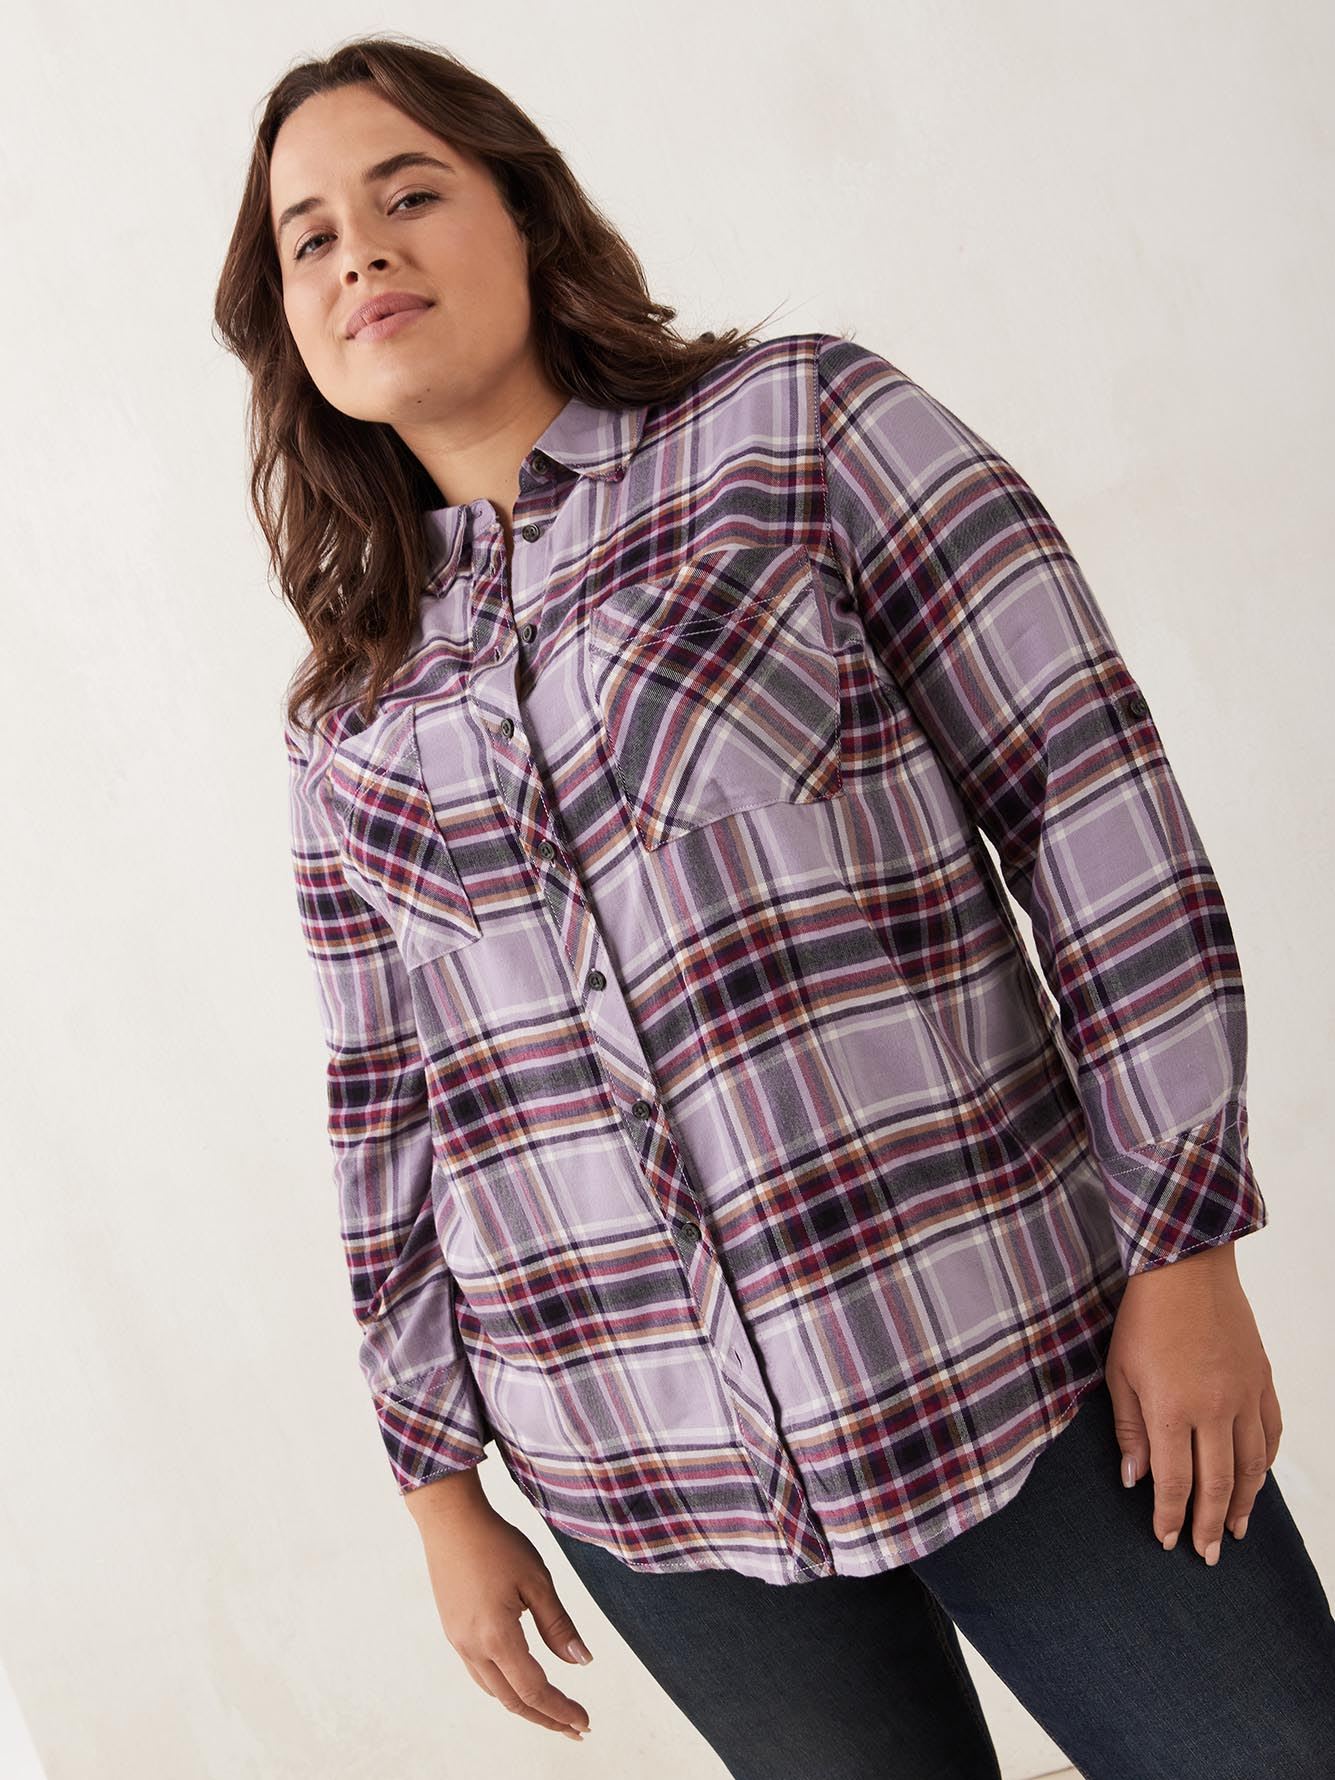 Plaid Shirt with Rolled-Up Sleeves